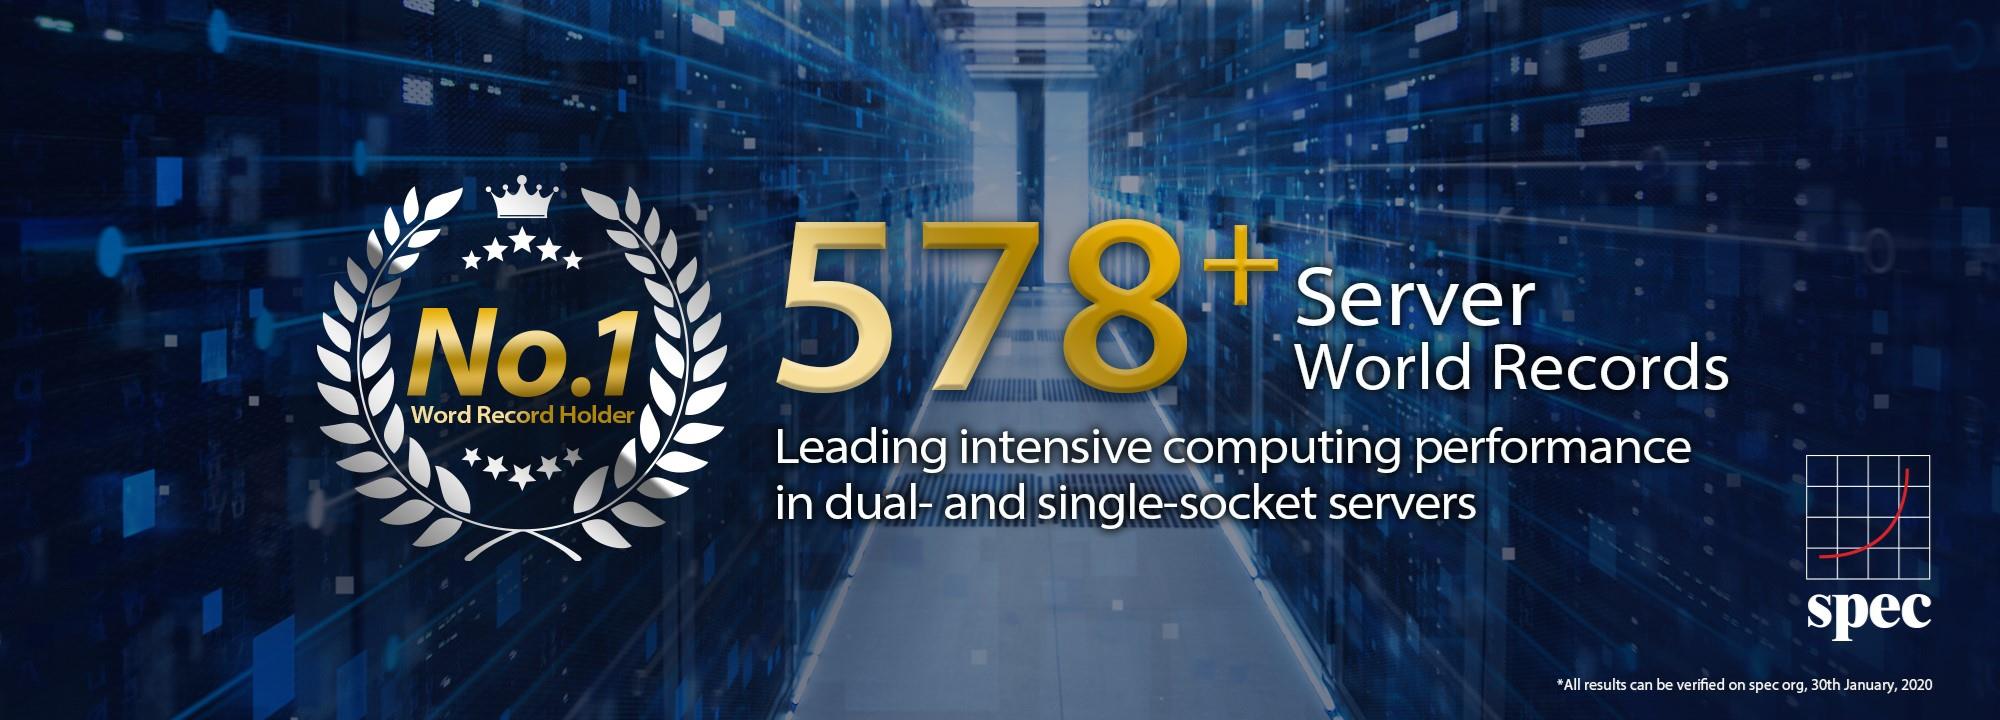 ASUS sets over 578 Server World Records, Leading intensive computering performance in dual-and single-socket servers